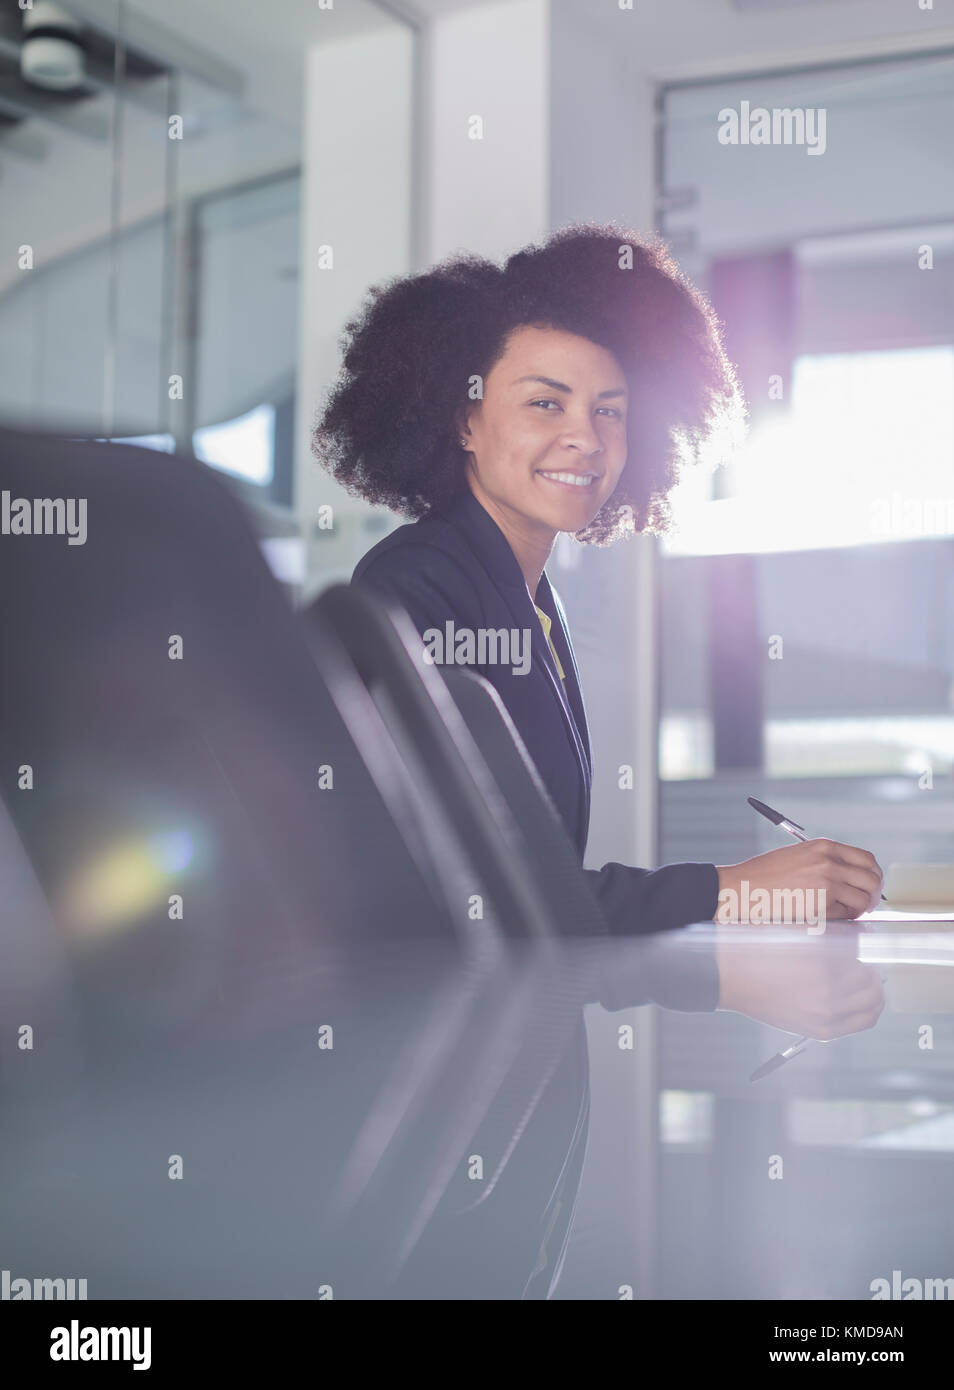 Portrait smiling businesswoman working in conference room Banque D'Images